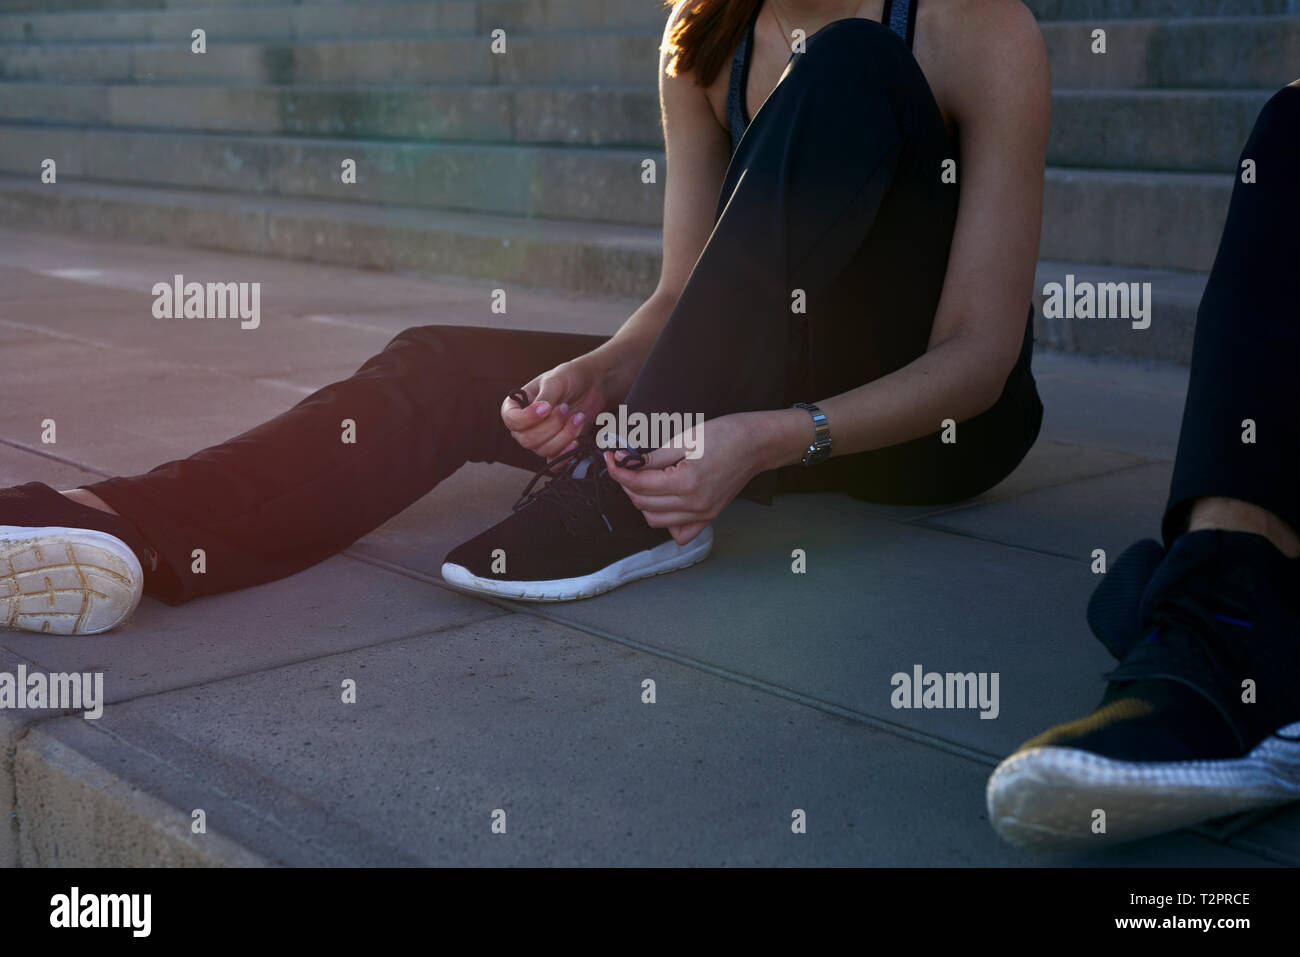 Woman tying shoelace on steps in sports stadium Stock Photo